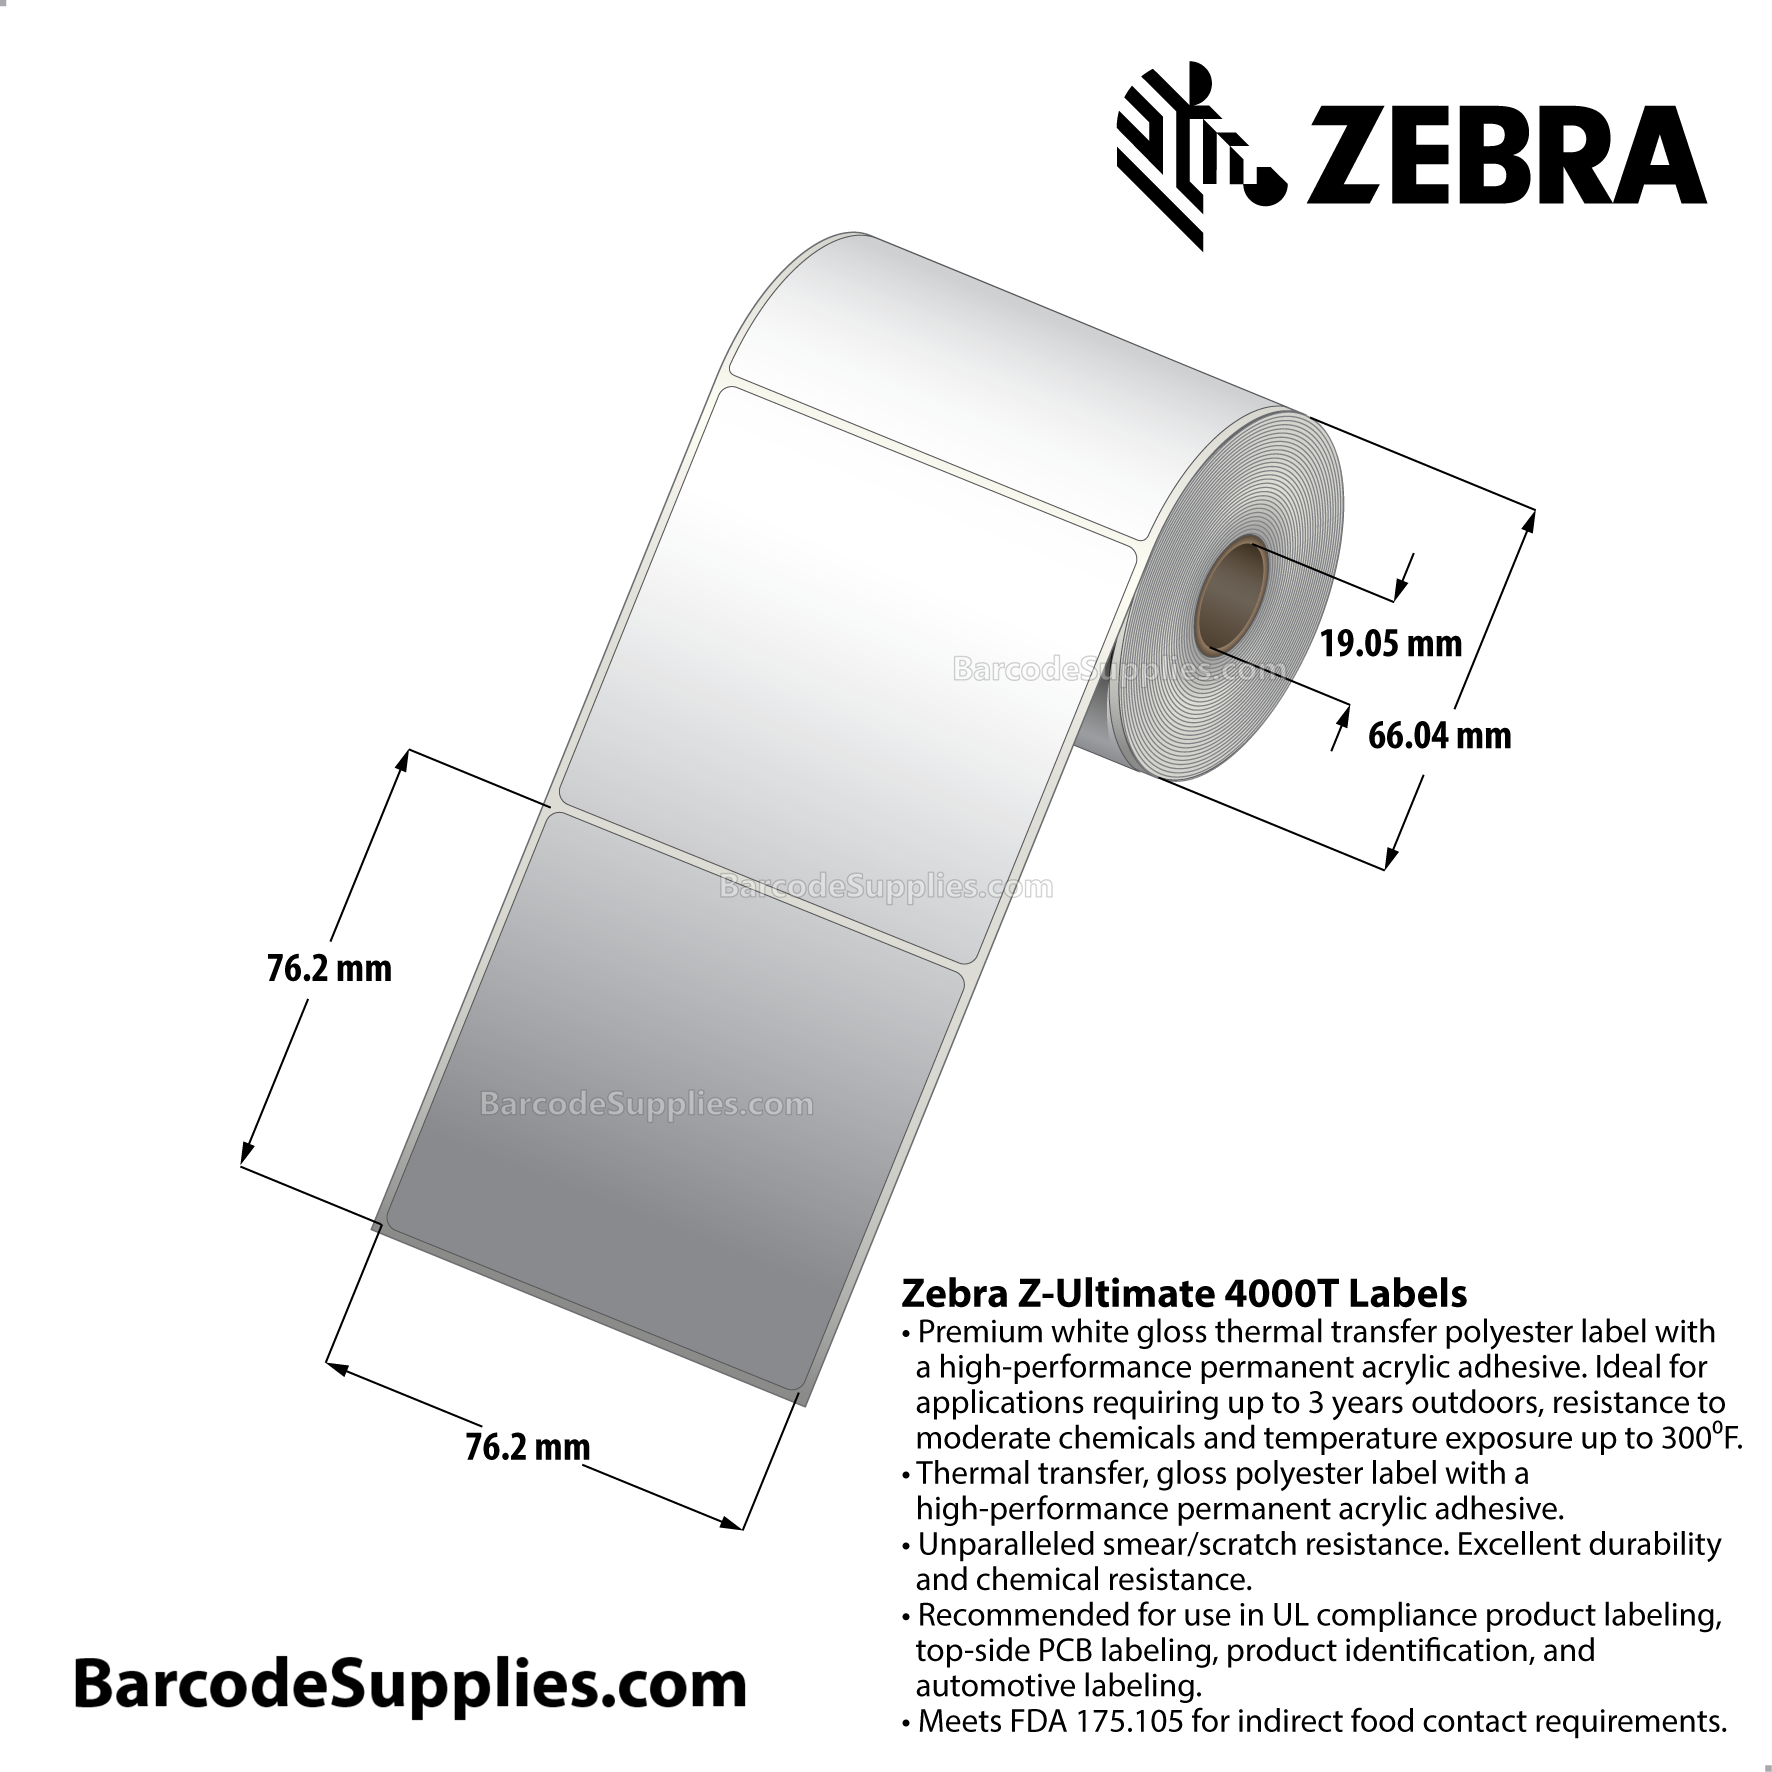 3 x 3 Thermal Transfer White Z-Ultimate 4000T Labels With Permanent Adhesive - Not Perforated - 230 Labels Per Roll - Carton Of 12 Rolls - 2760 Labels Total - MPN: 10008551